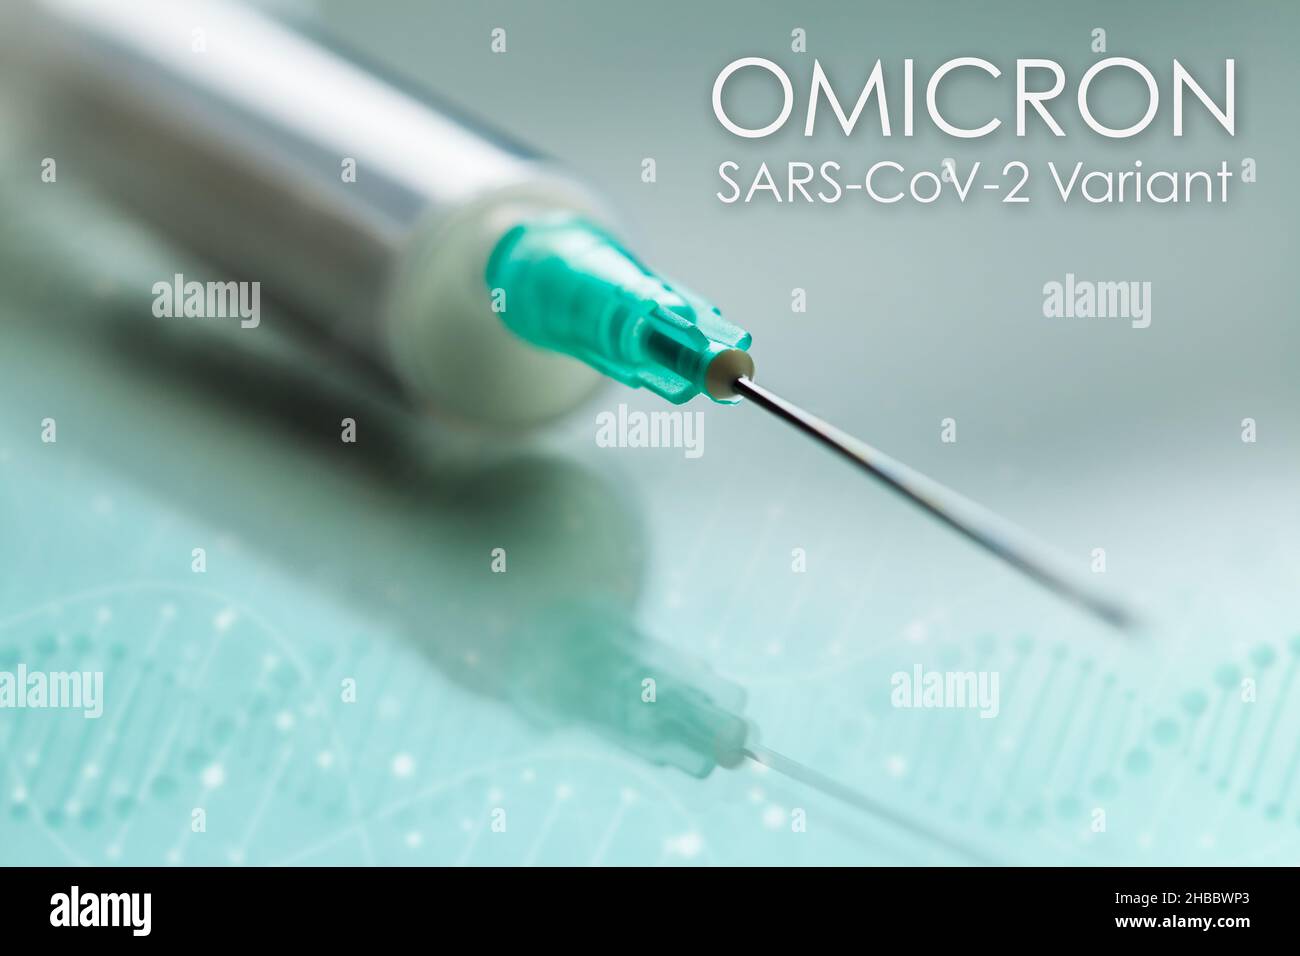 White syringe with green needle on reflective background,concept of vaccination and immunization against SARS-CoV-2 OMICRON variant,new mutant strain Stock Photo